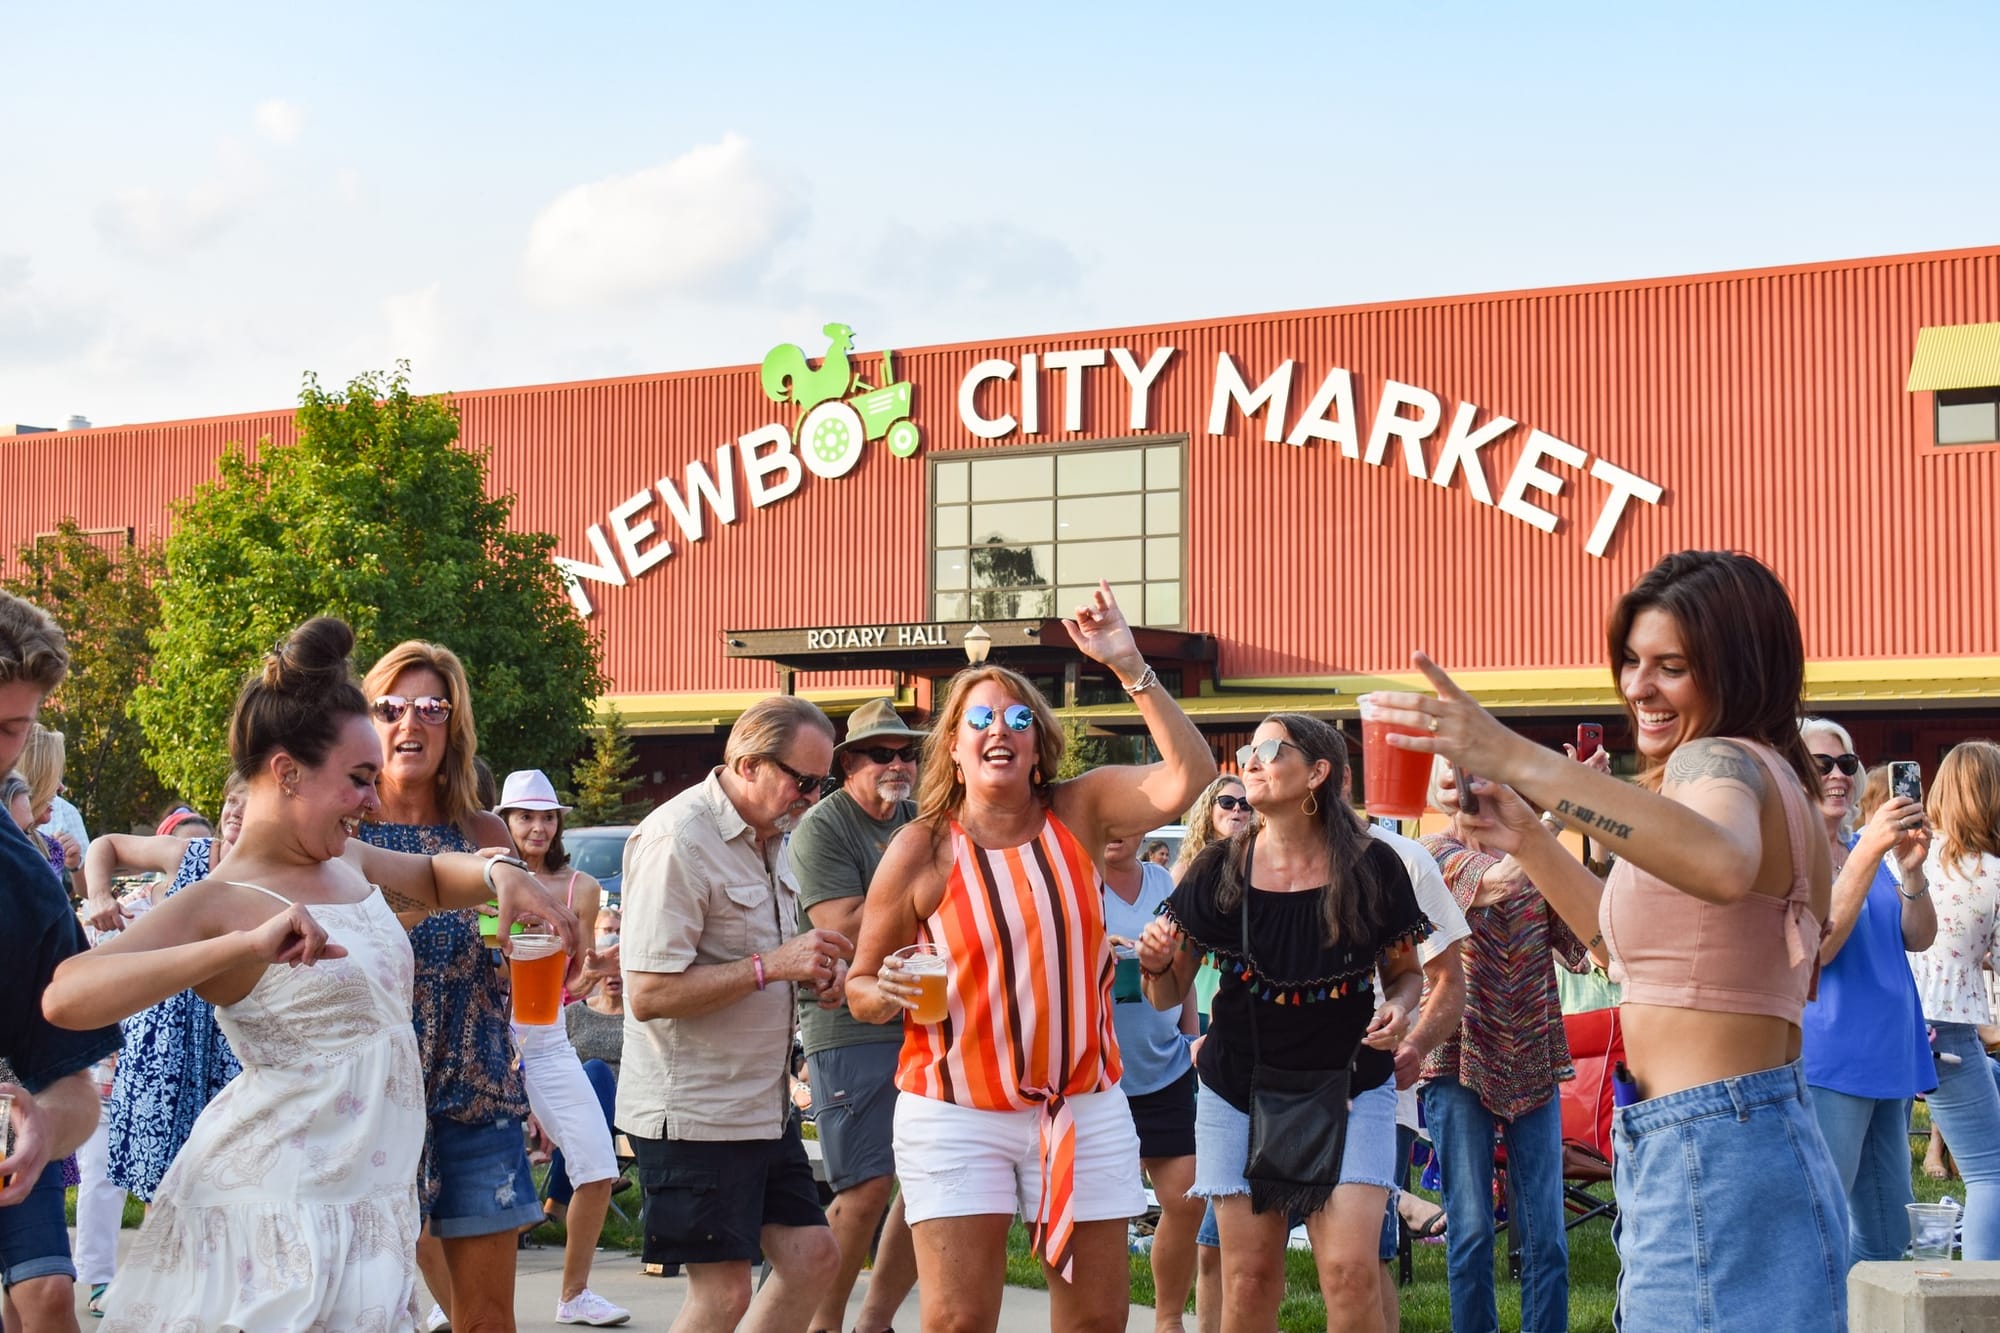 NewBo City Market: When a Market is Also the Town Square